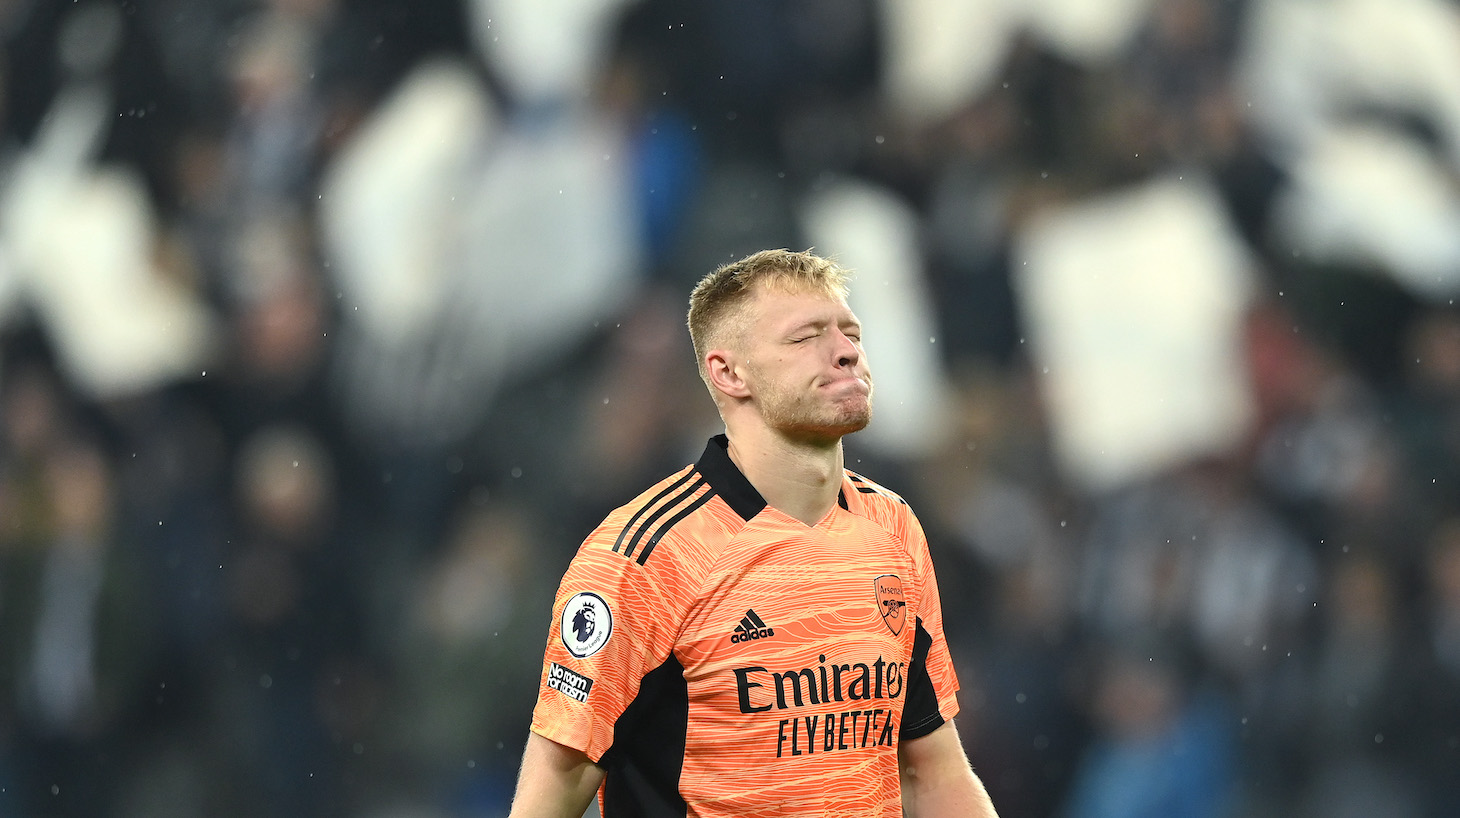 Arsenal goalkeeper Aaron Ramsdale reacts after the Premier League match between Newcastle United and Arsenal at St. James Park on May 16, 2022 in Newcastle upon Tyne, England.